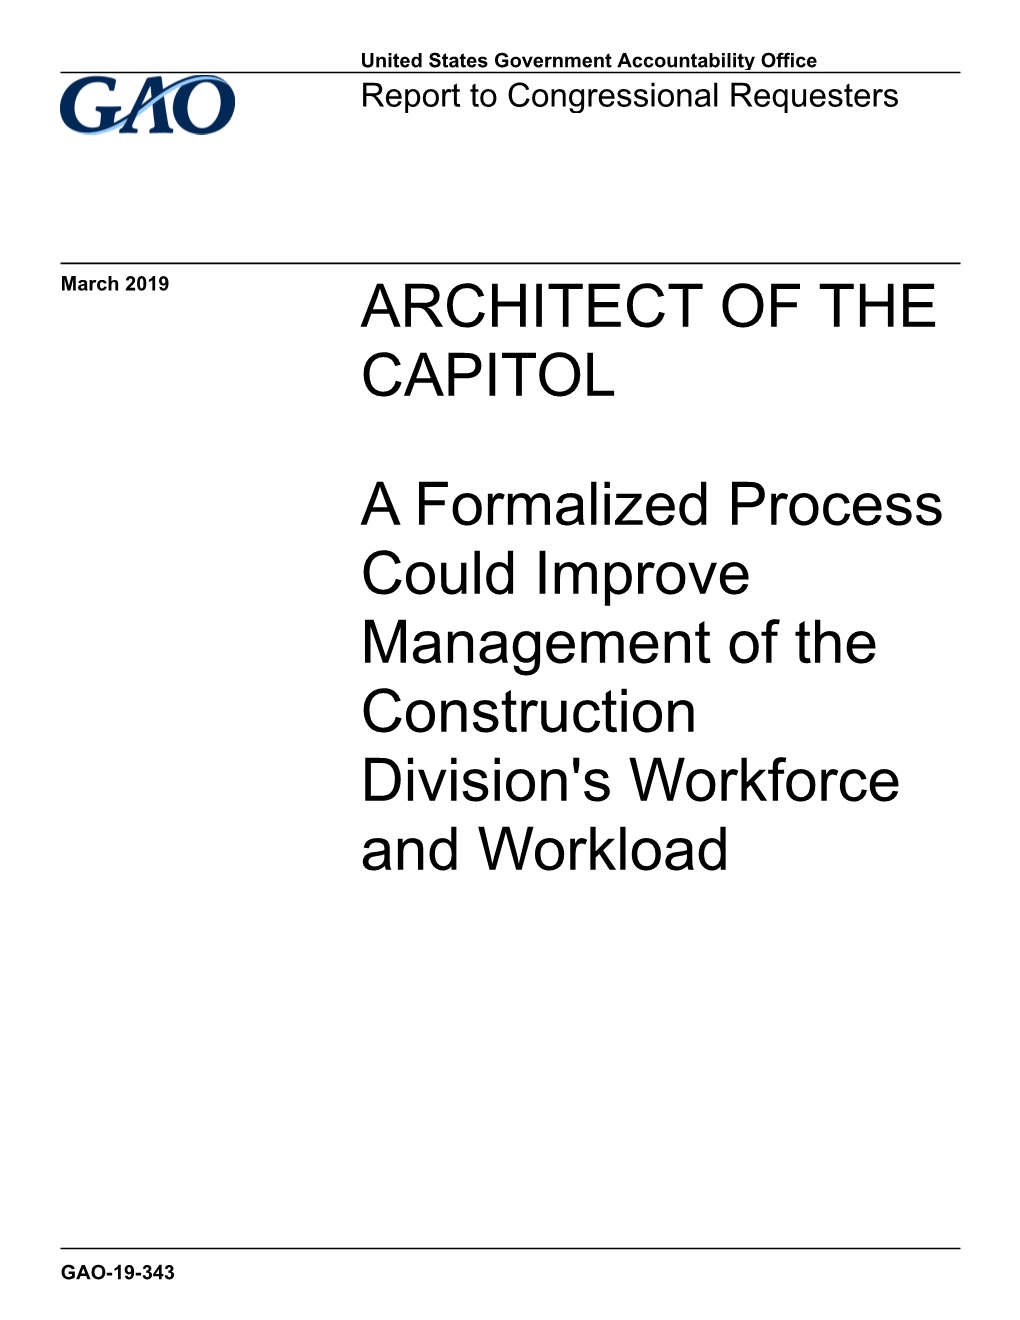 Gao-19-343, Architect of the Capitol